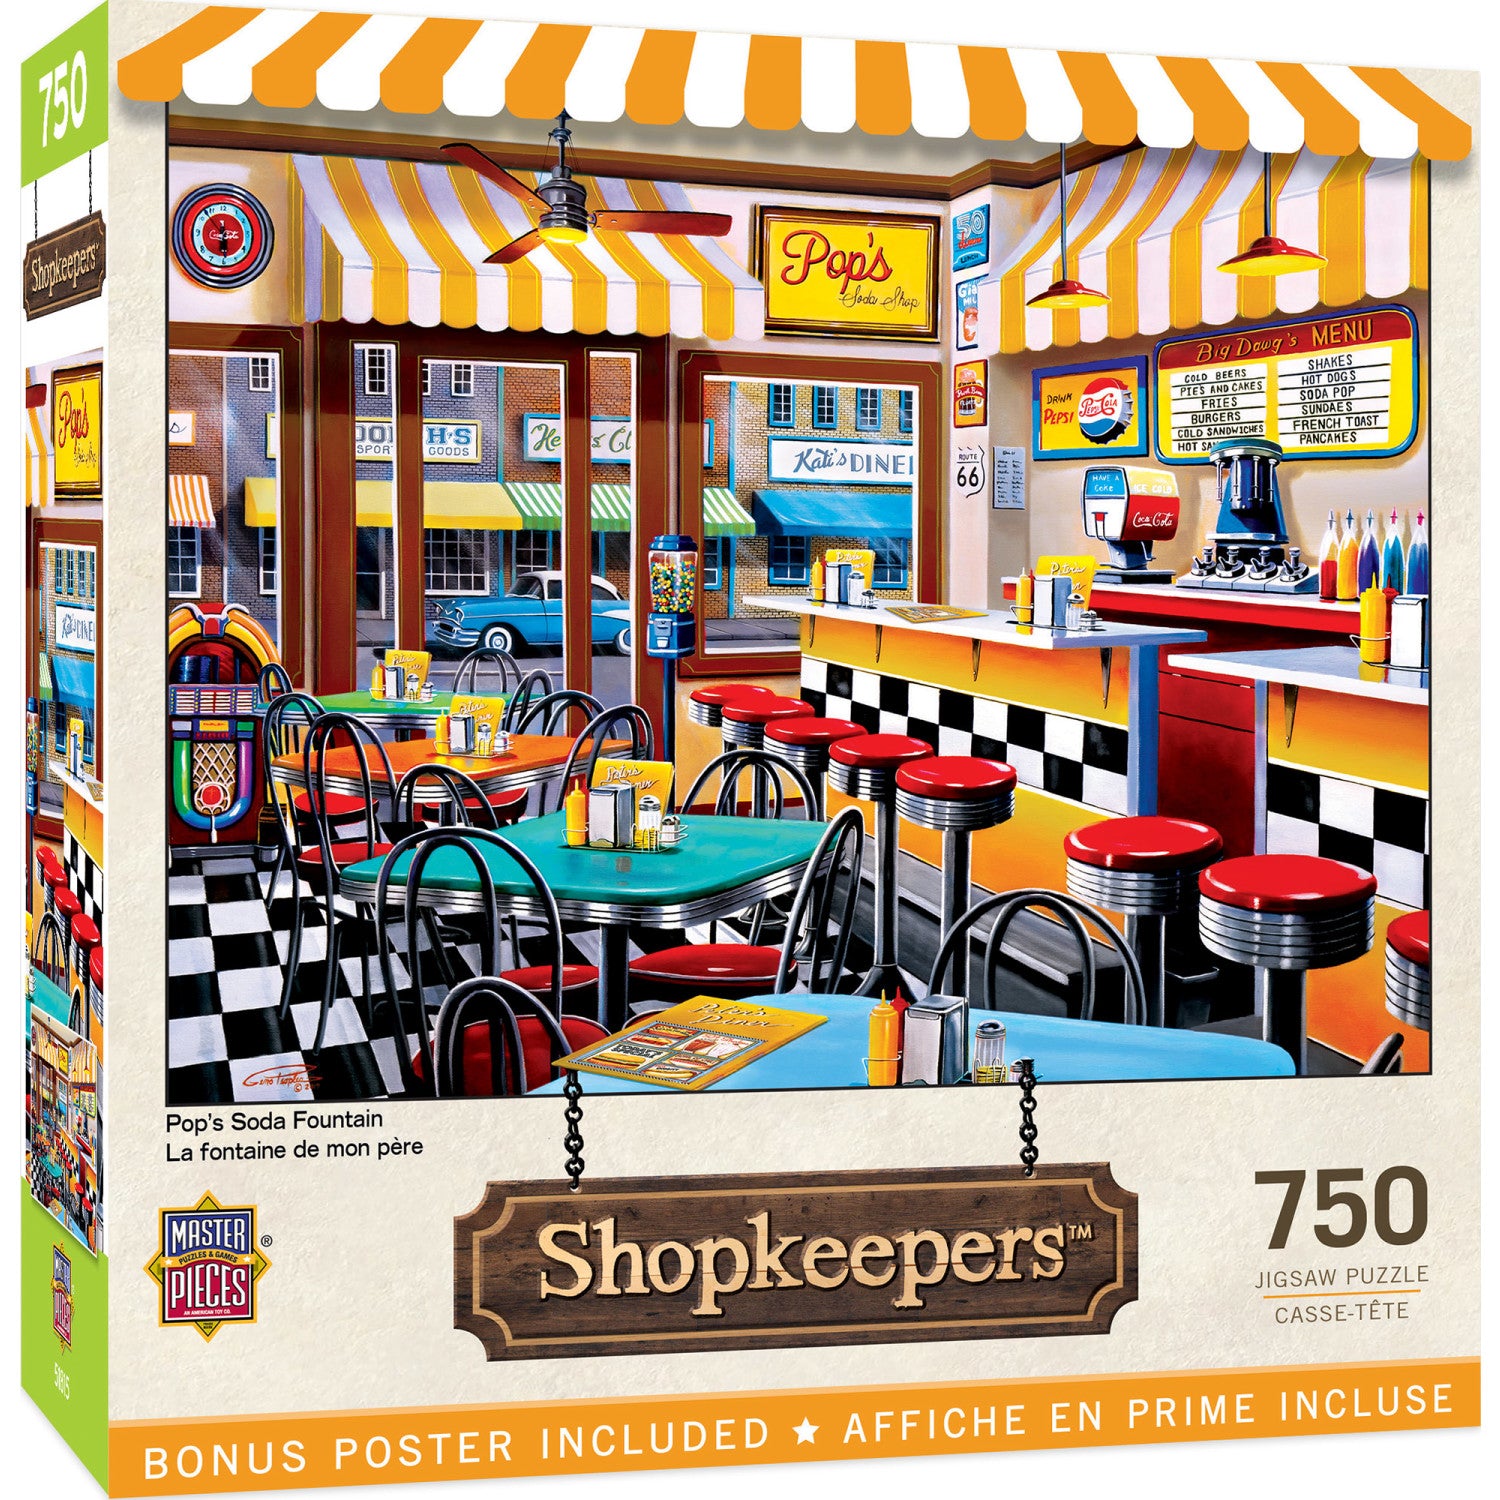 Shopkeepers - Pop's Soda Fountain 750 Piece Puzzle